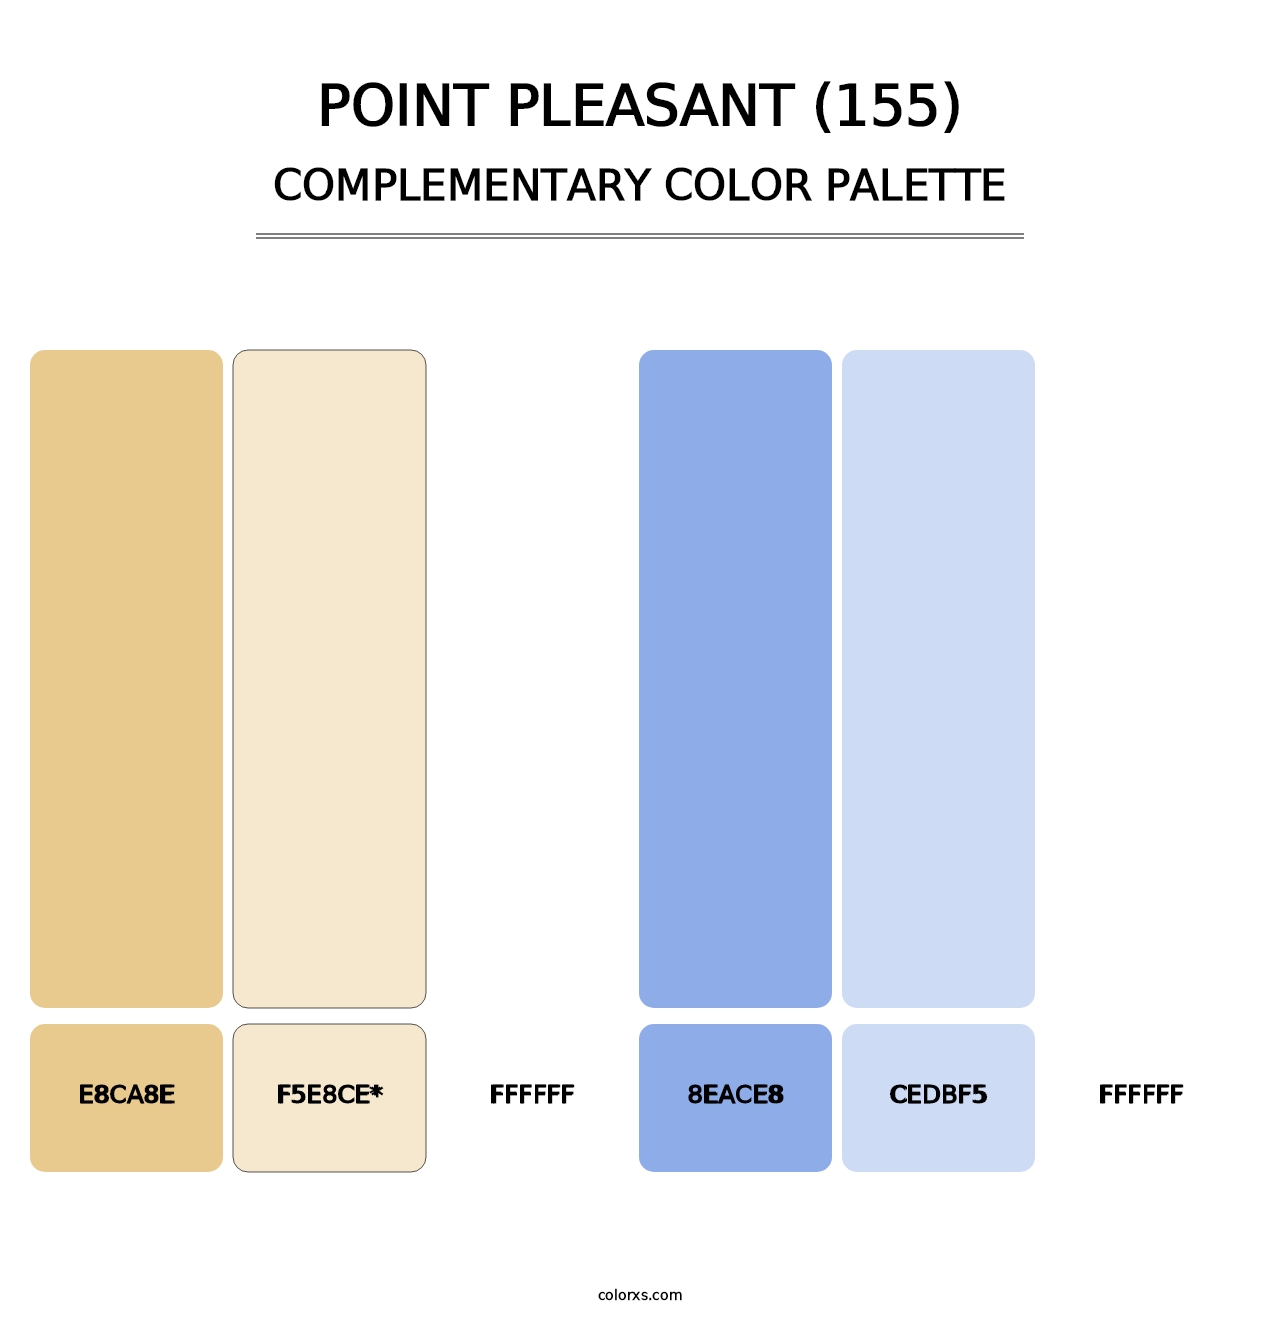 Point Pleasant (155) - Complementary Color Palette